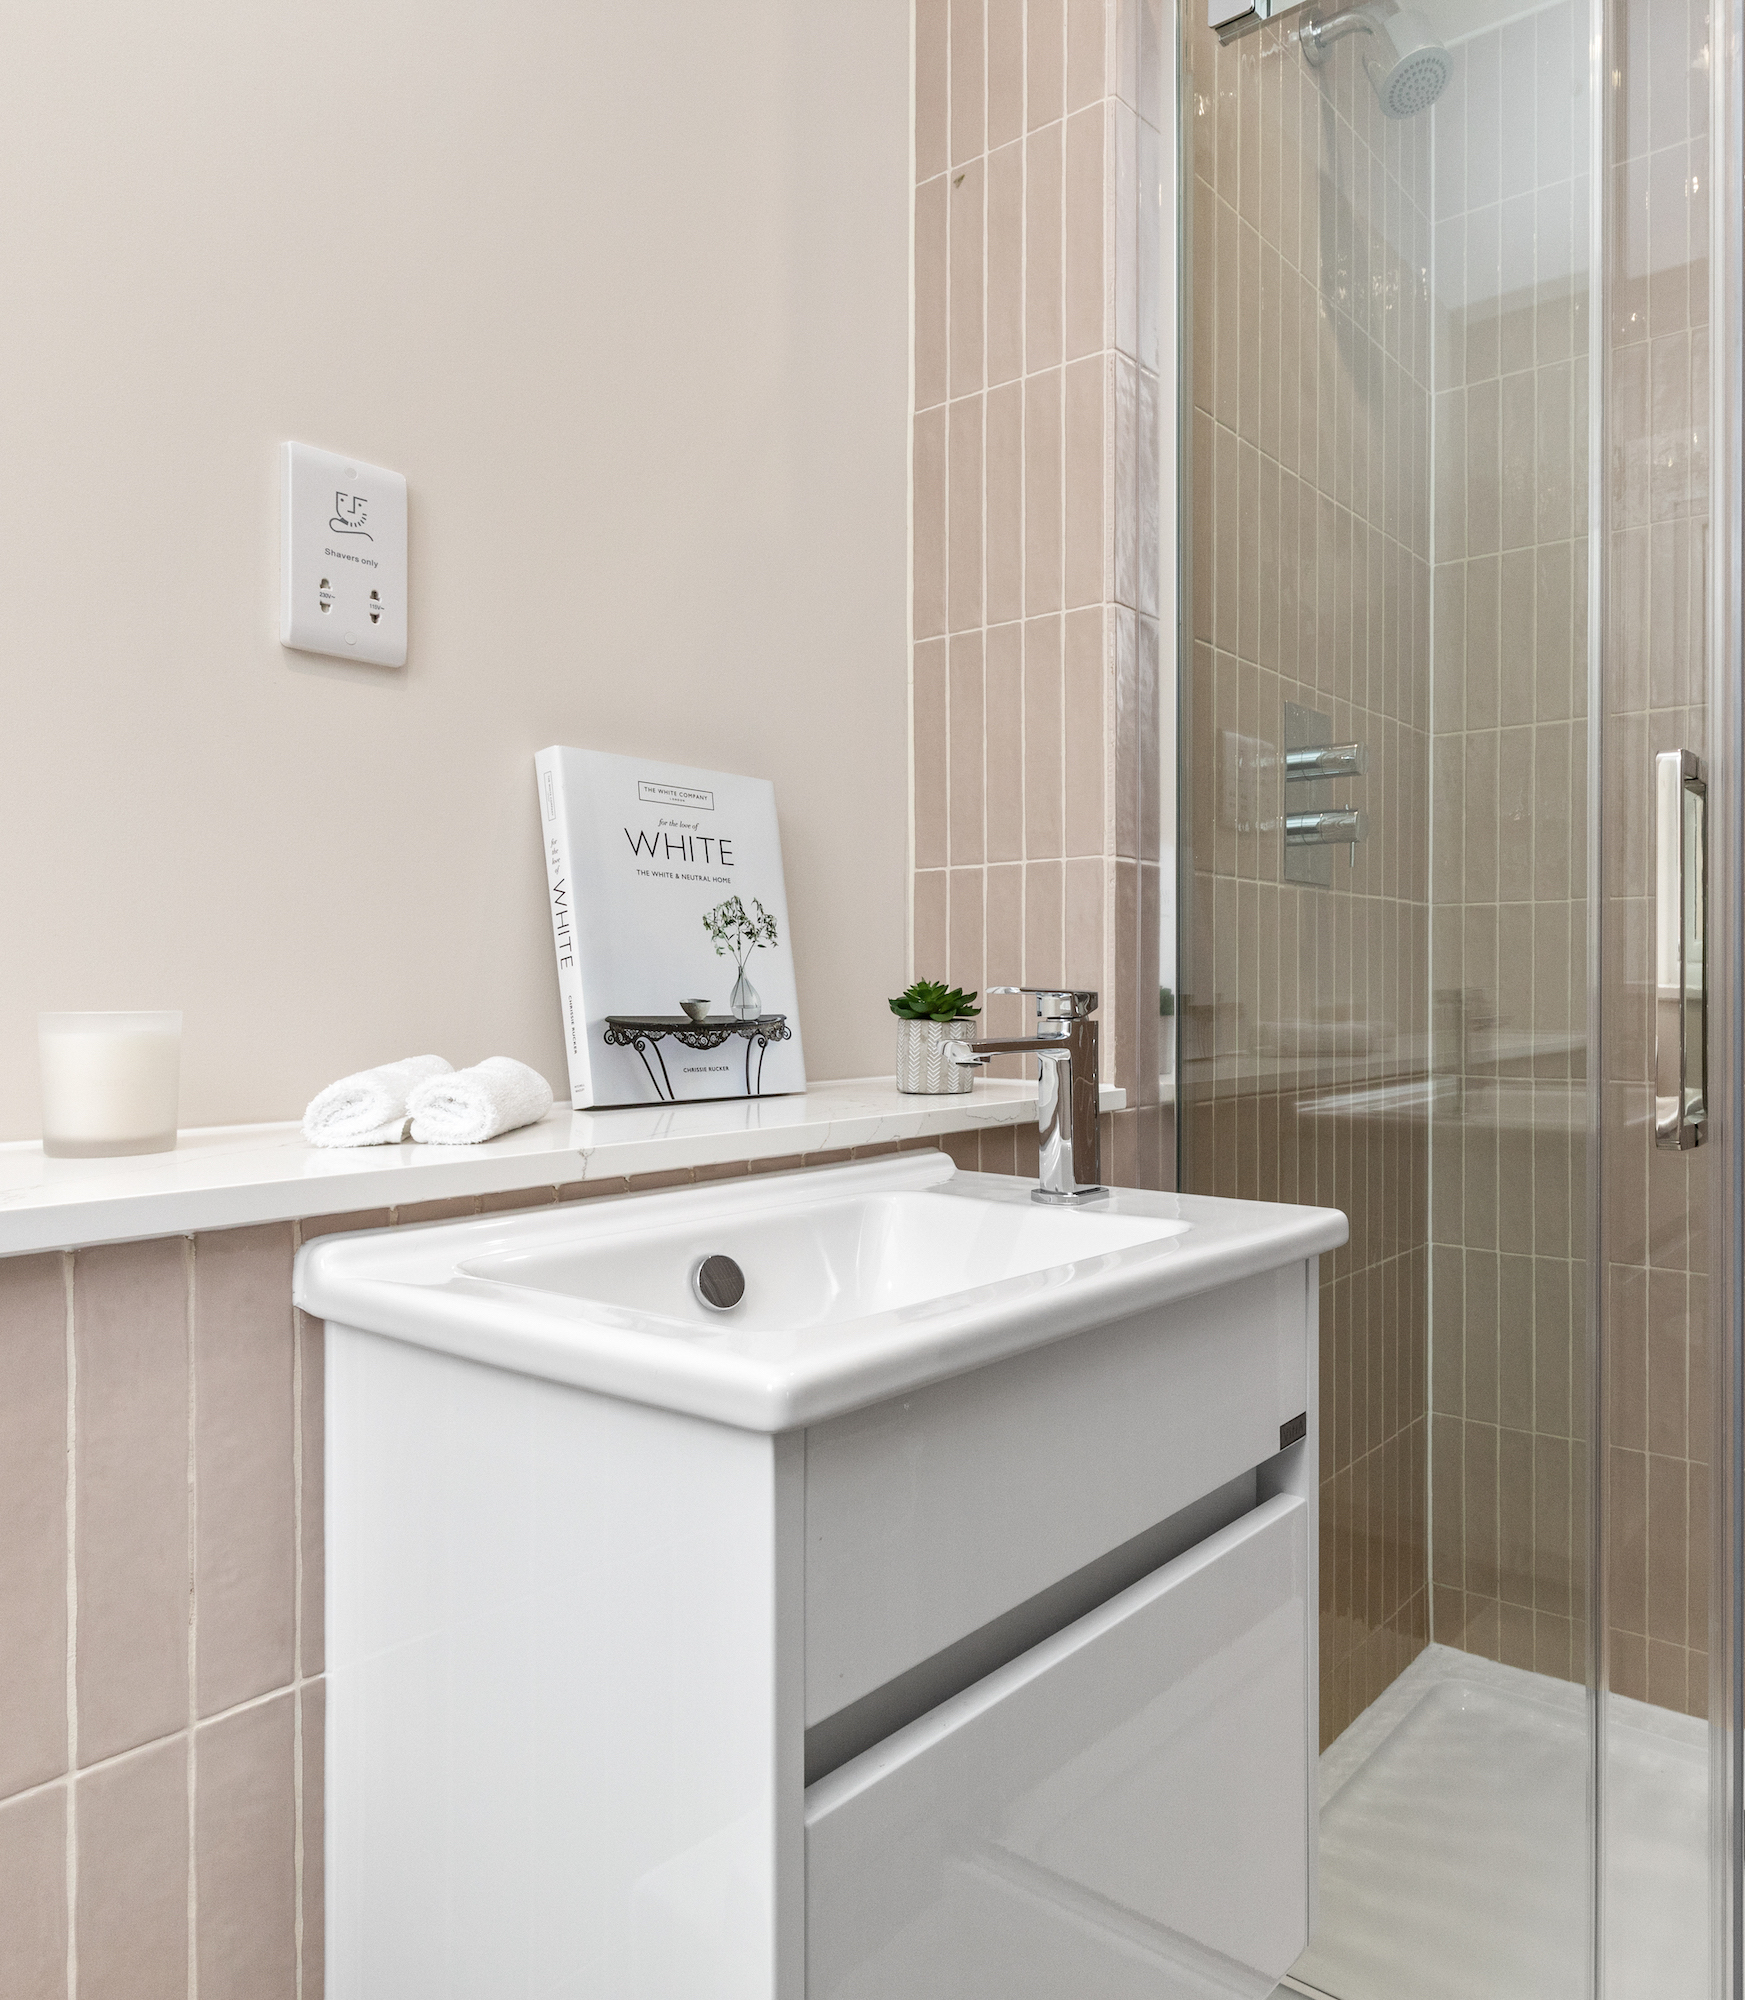 Property Development in East Sussex, Lewes. Bathroom and Sanitary Ware Specification